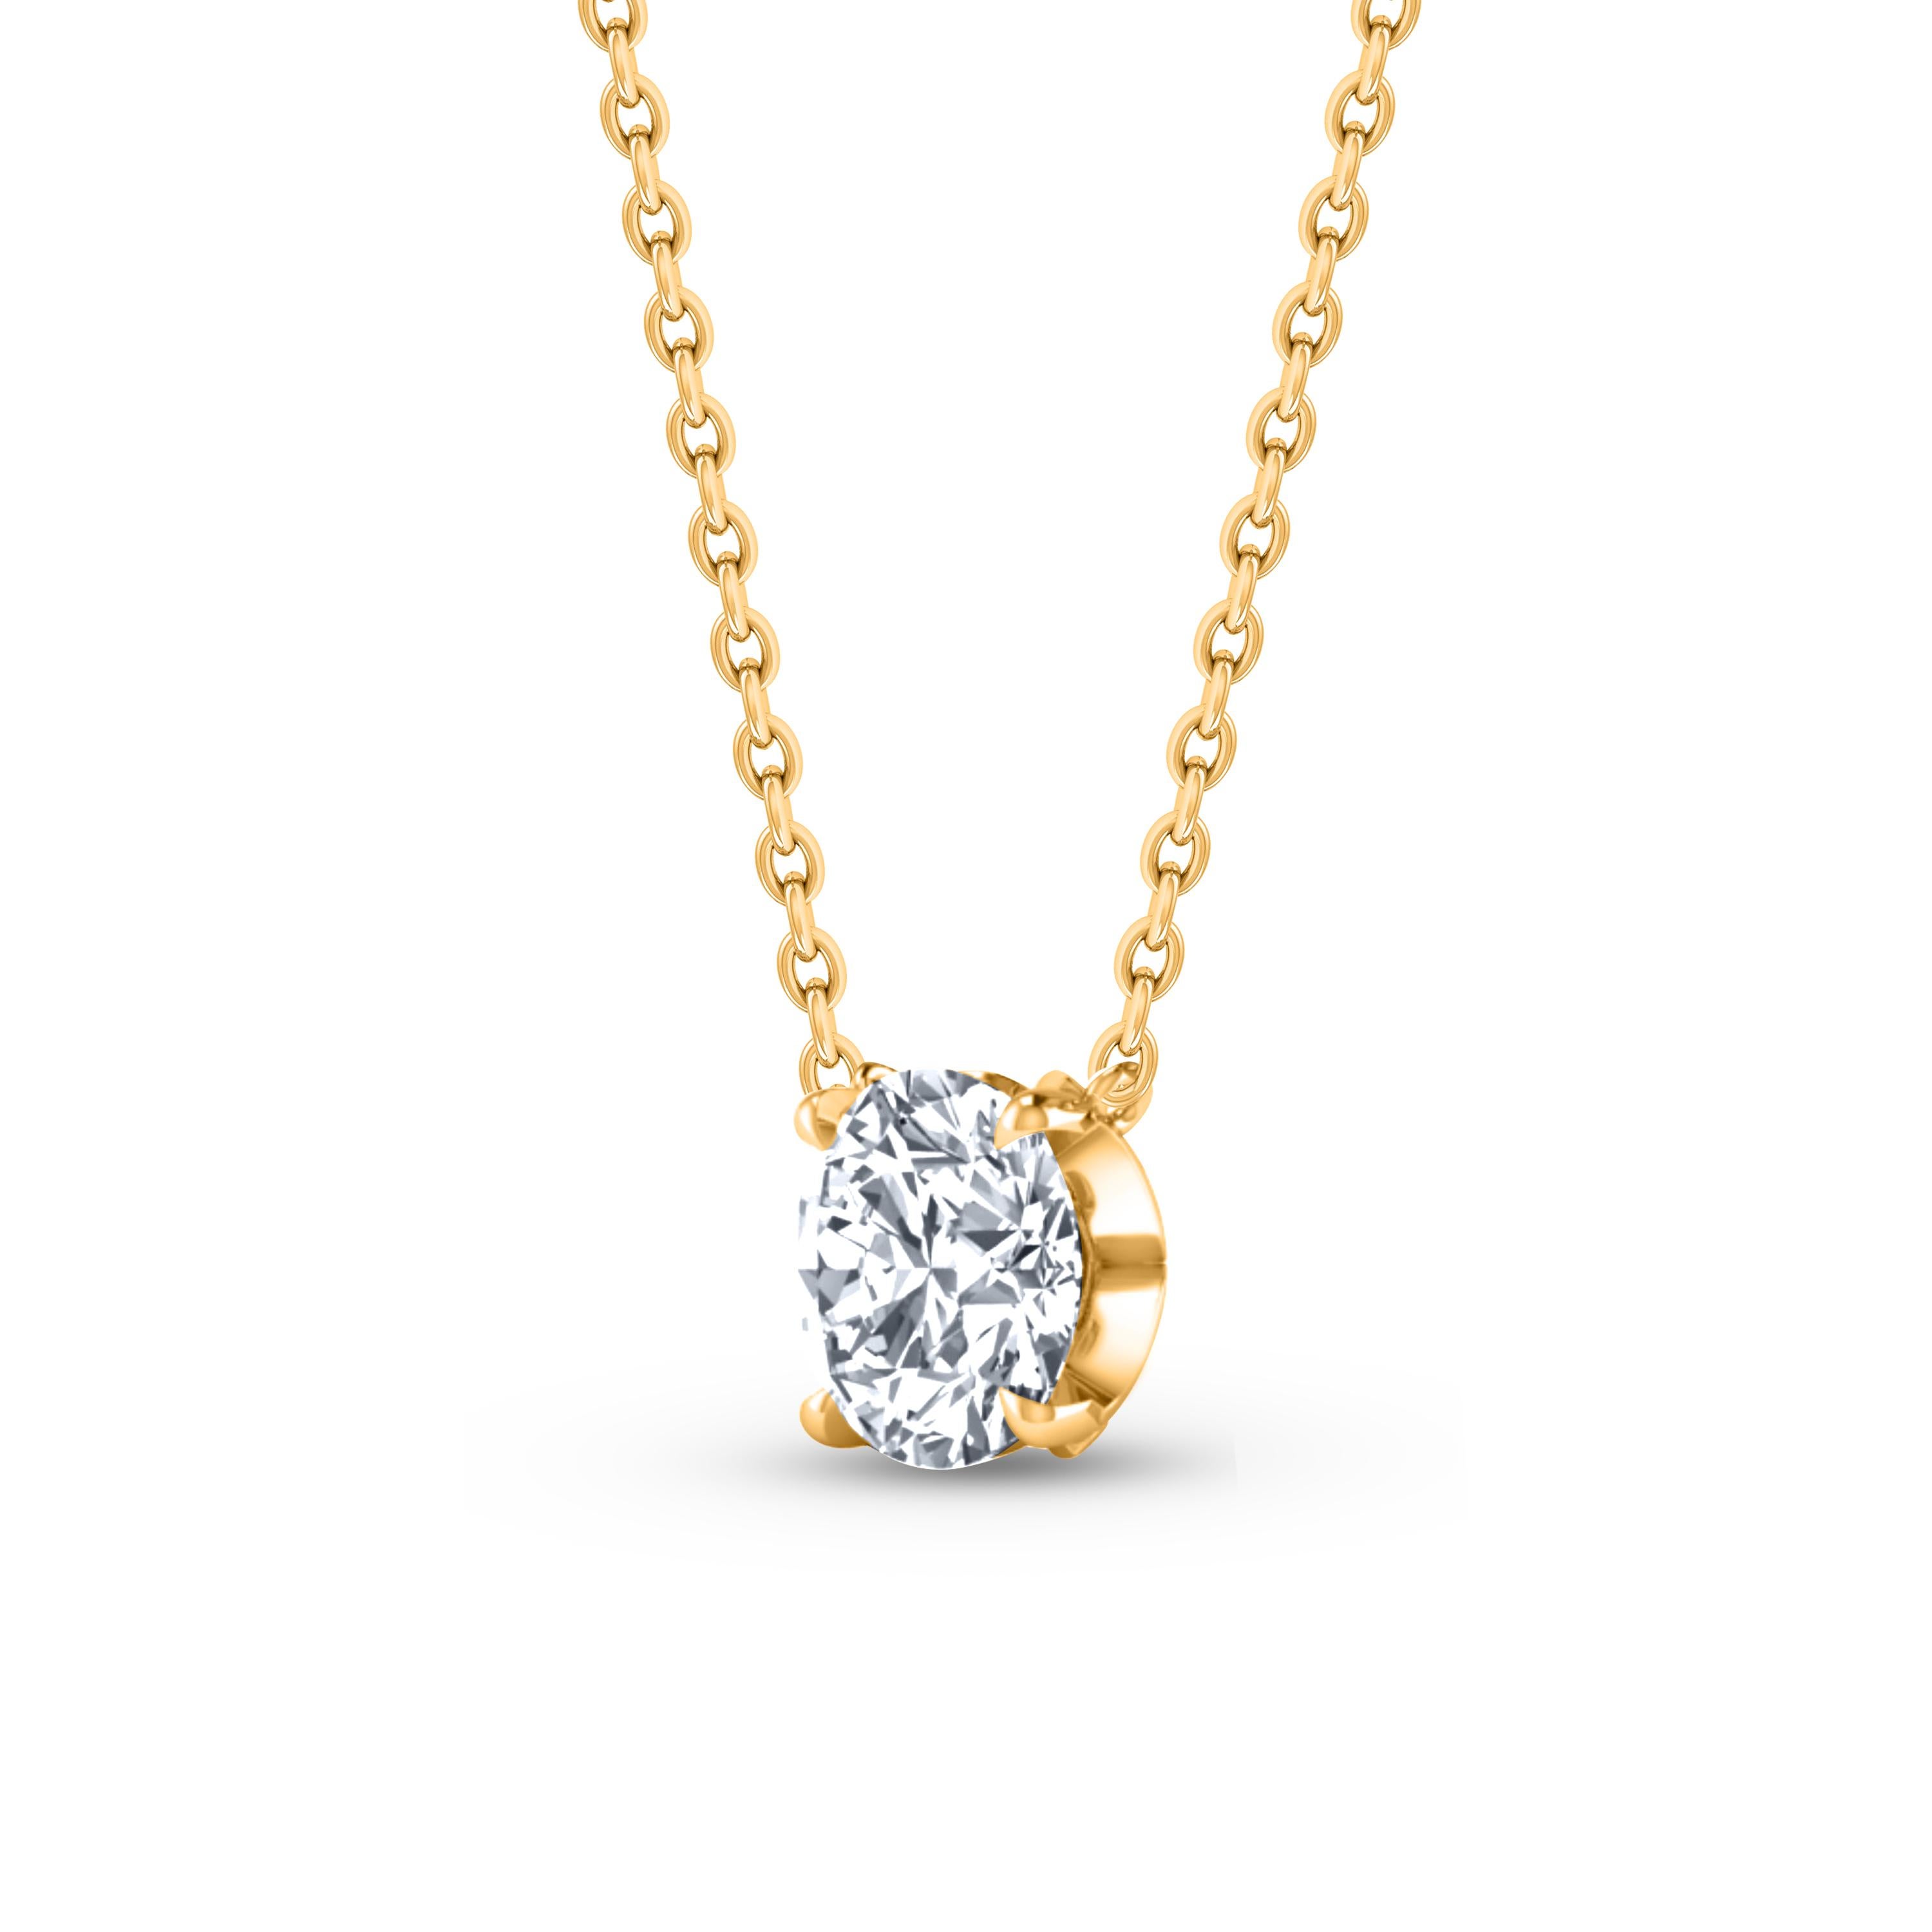  This solitaire diamond necklace features a single, brilliant-cut 0.45 carat diamond in prong setting crafted in 18 KT yellow gold. This elegant necklace includes 20-inch cable chain with extender at 16-inch and 18-inch. 

(Carat weights may vary